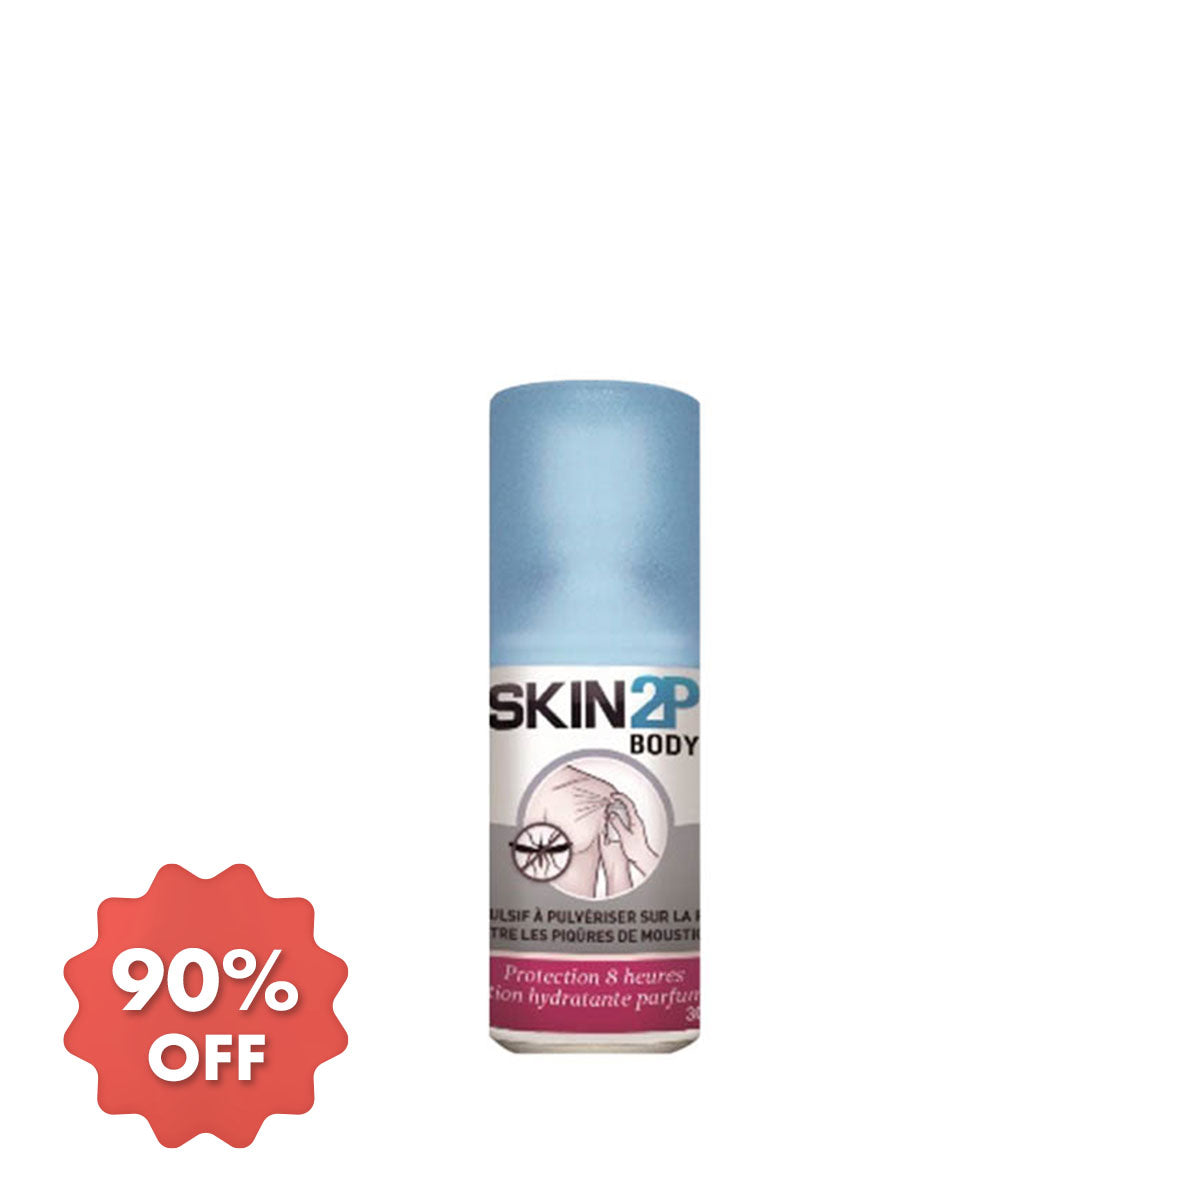 PSA SKIN2P™ Insect Repellent (Icaridin)